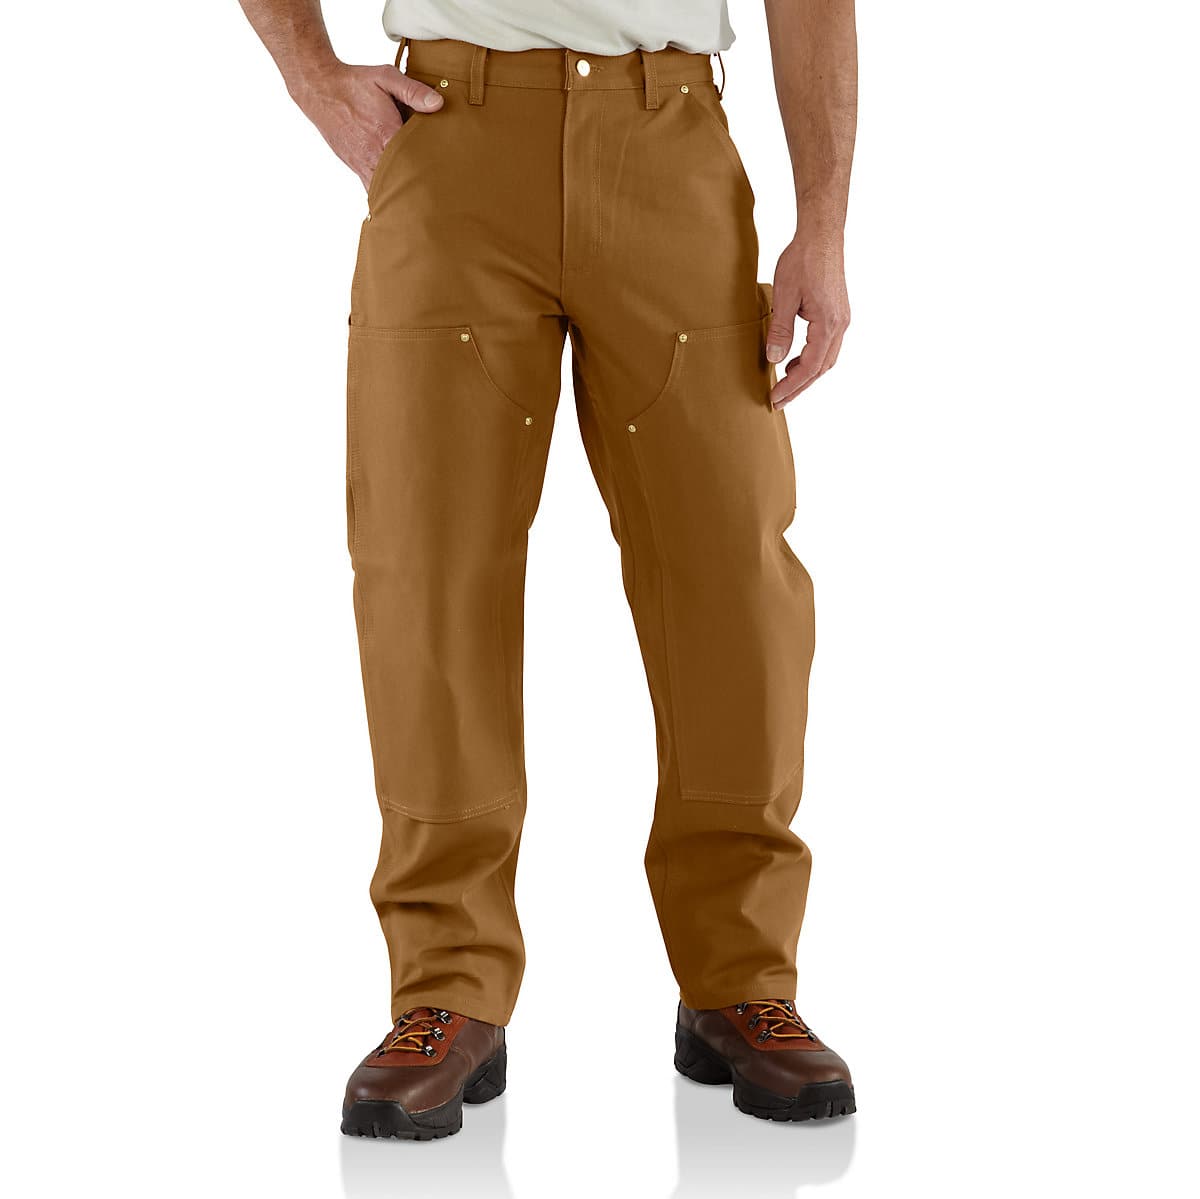 Carhartt Mens Firm Duck Double Front Work Dungaree Pant B01